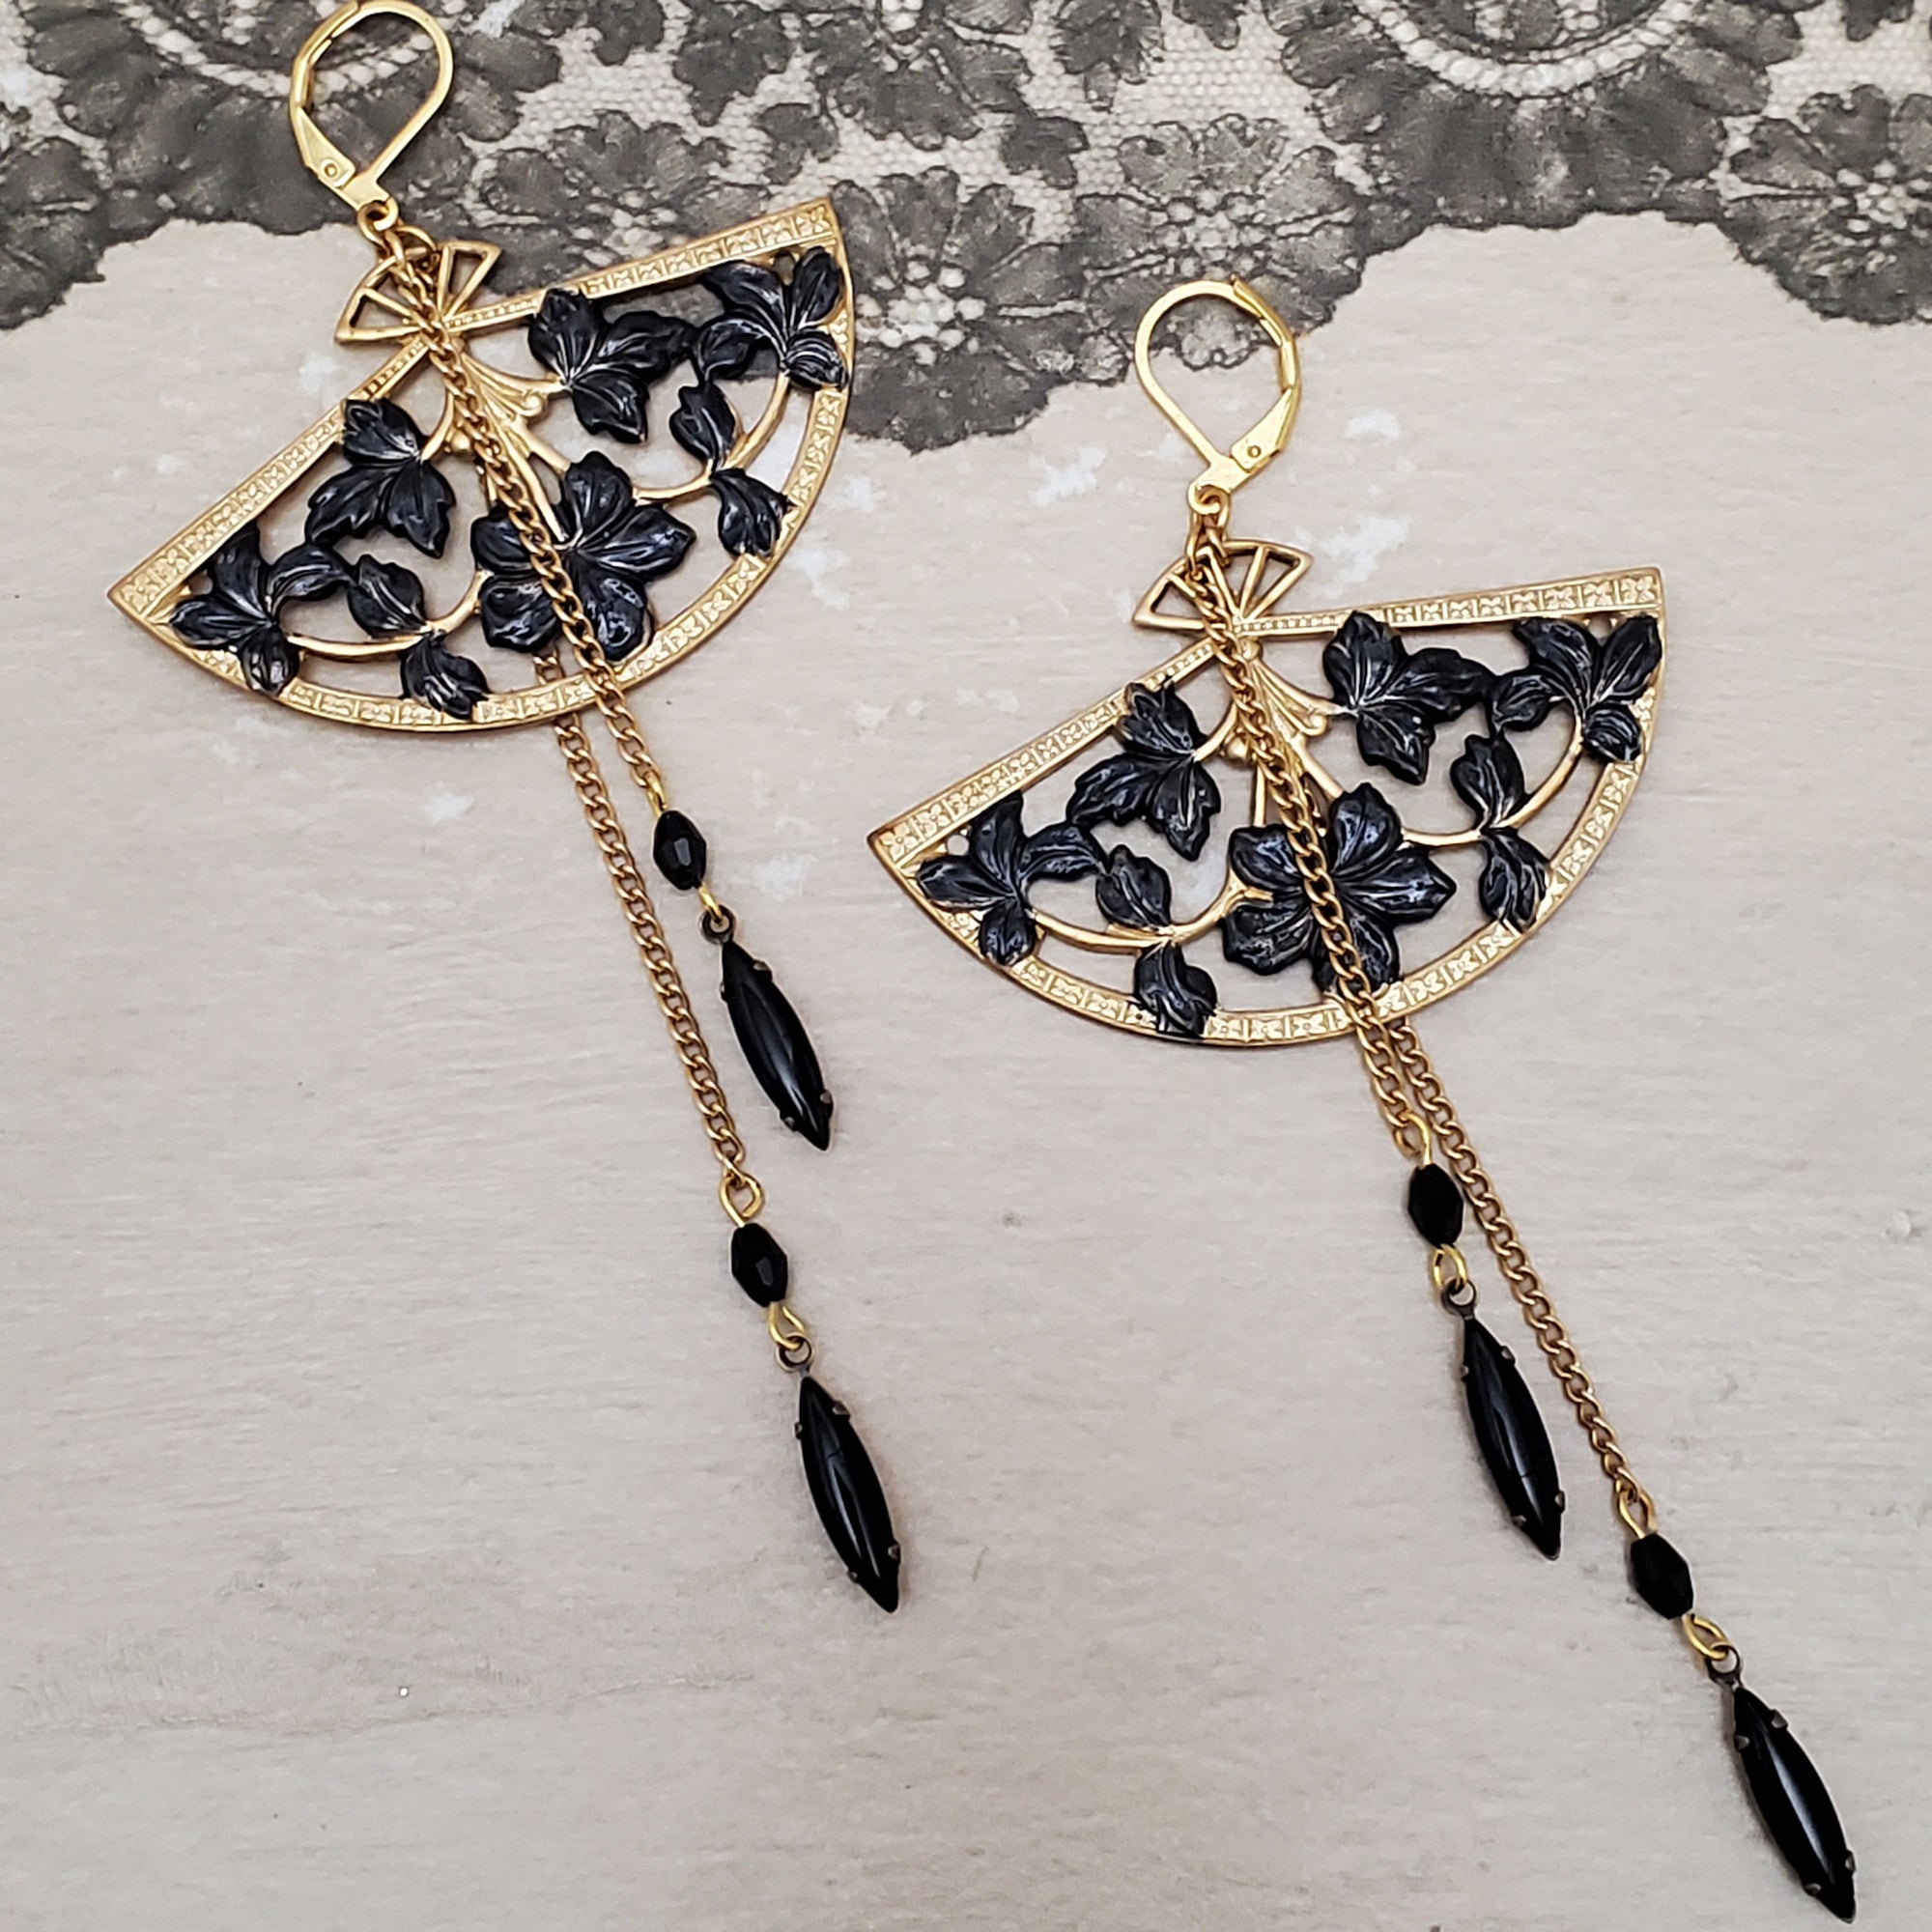 Black and Gold Floral Fan Earrings with Chain Accents finished with black gemstone drops